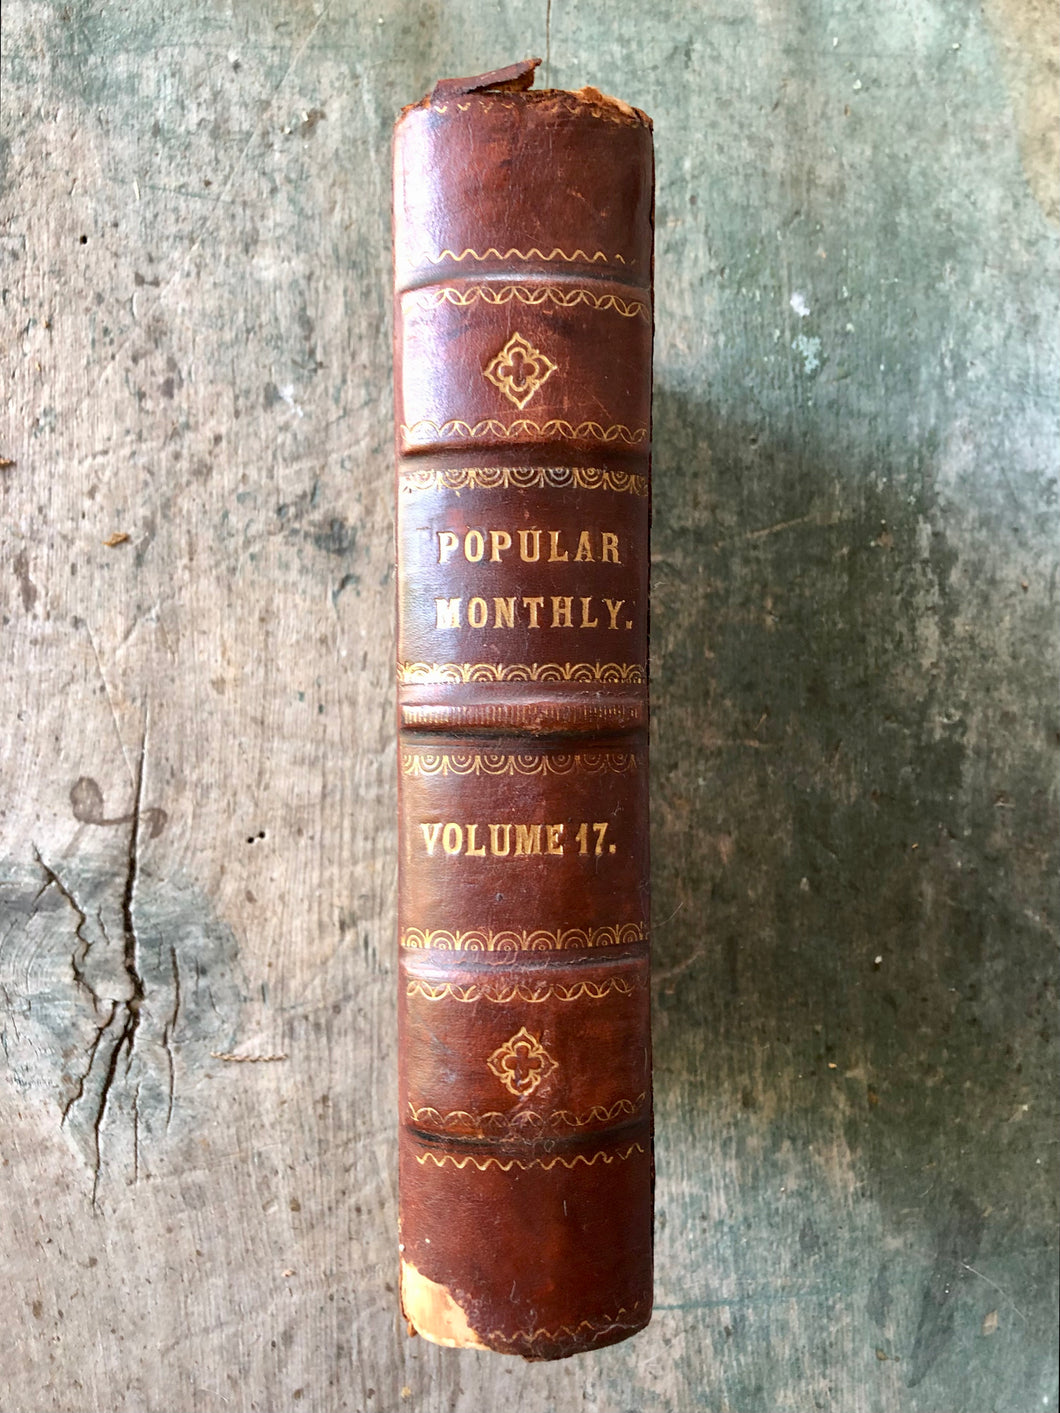 Frank Leslie’s Popular Monthly. Vol. XVII. —January to June, 1884.